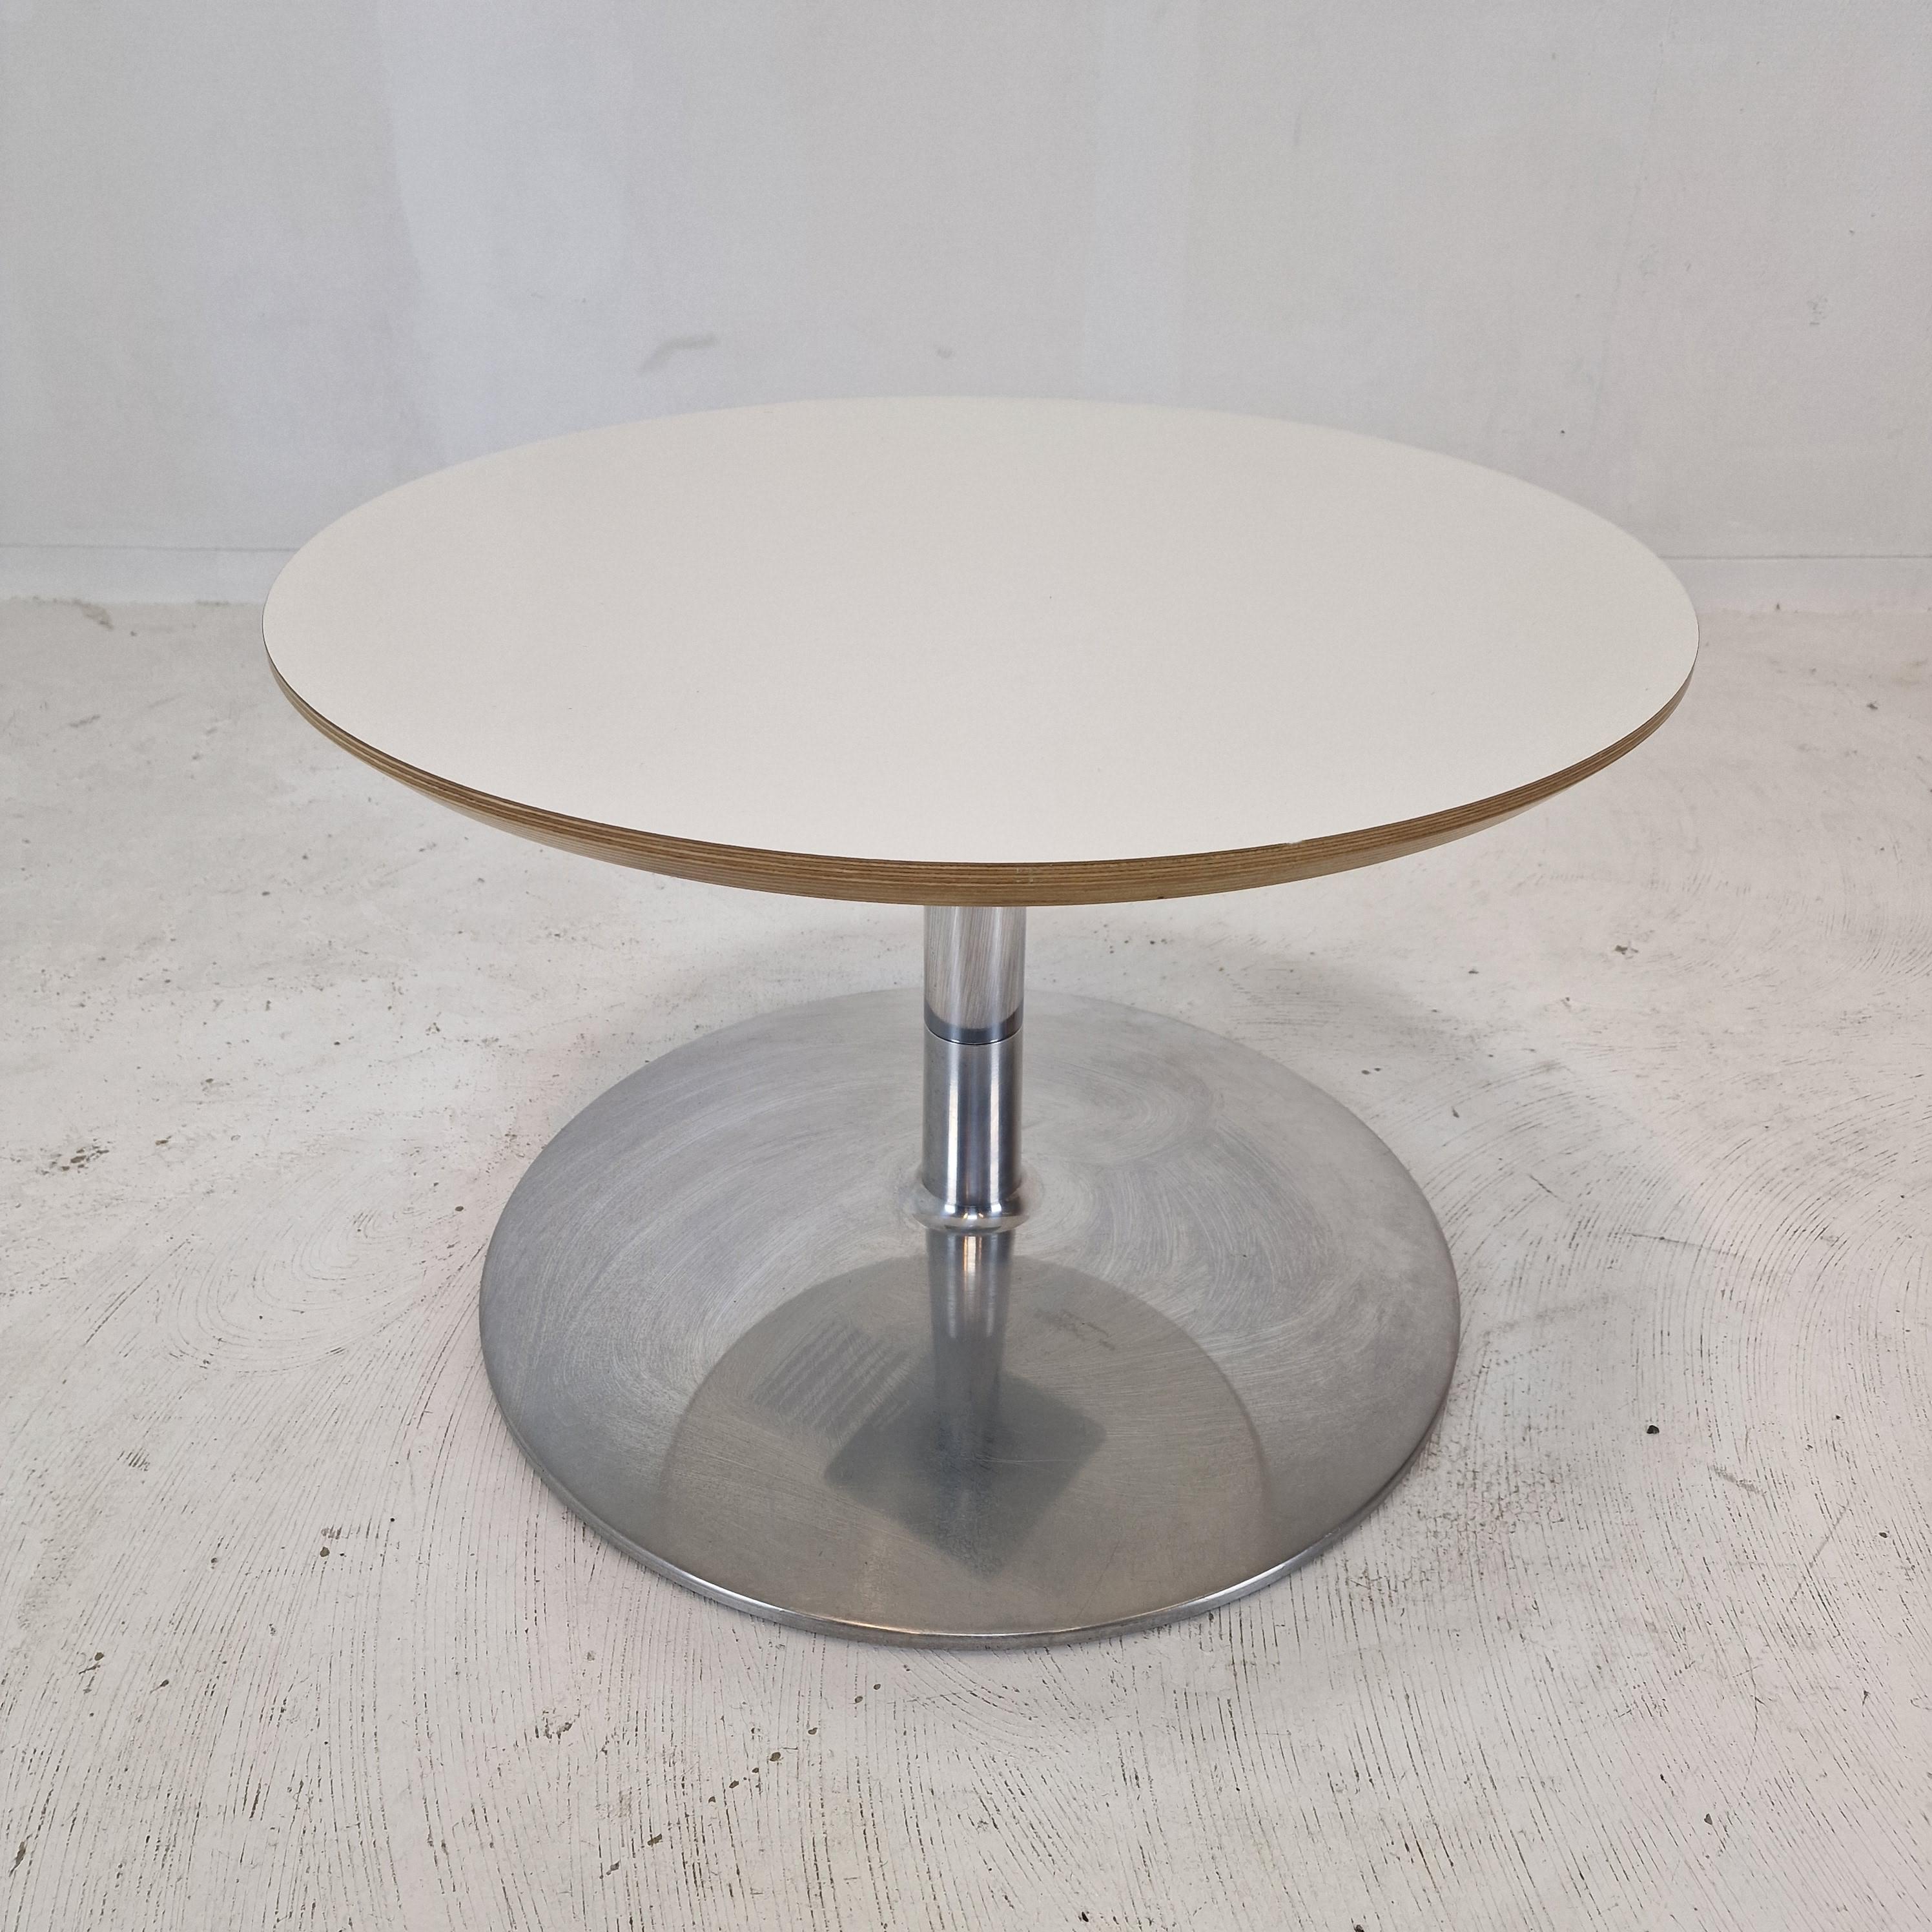 Very nice round coffee table, designed by Geoffrey Harcourt in the 60's. 

This lovely piece is manufactured by Artifort.
The high quality table is made with the best materials. 

The wooden laminated plate is in good vintage condition. 
The